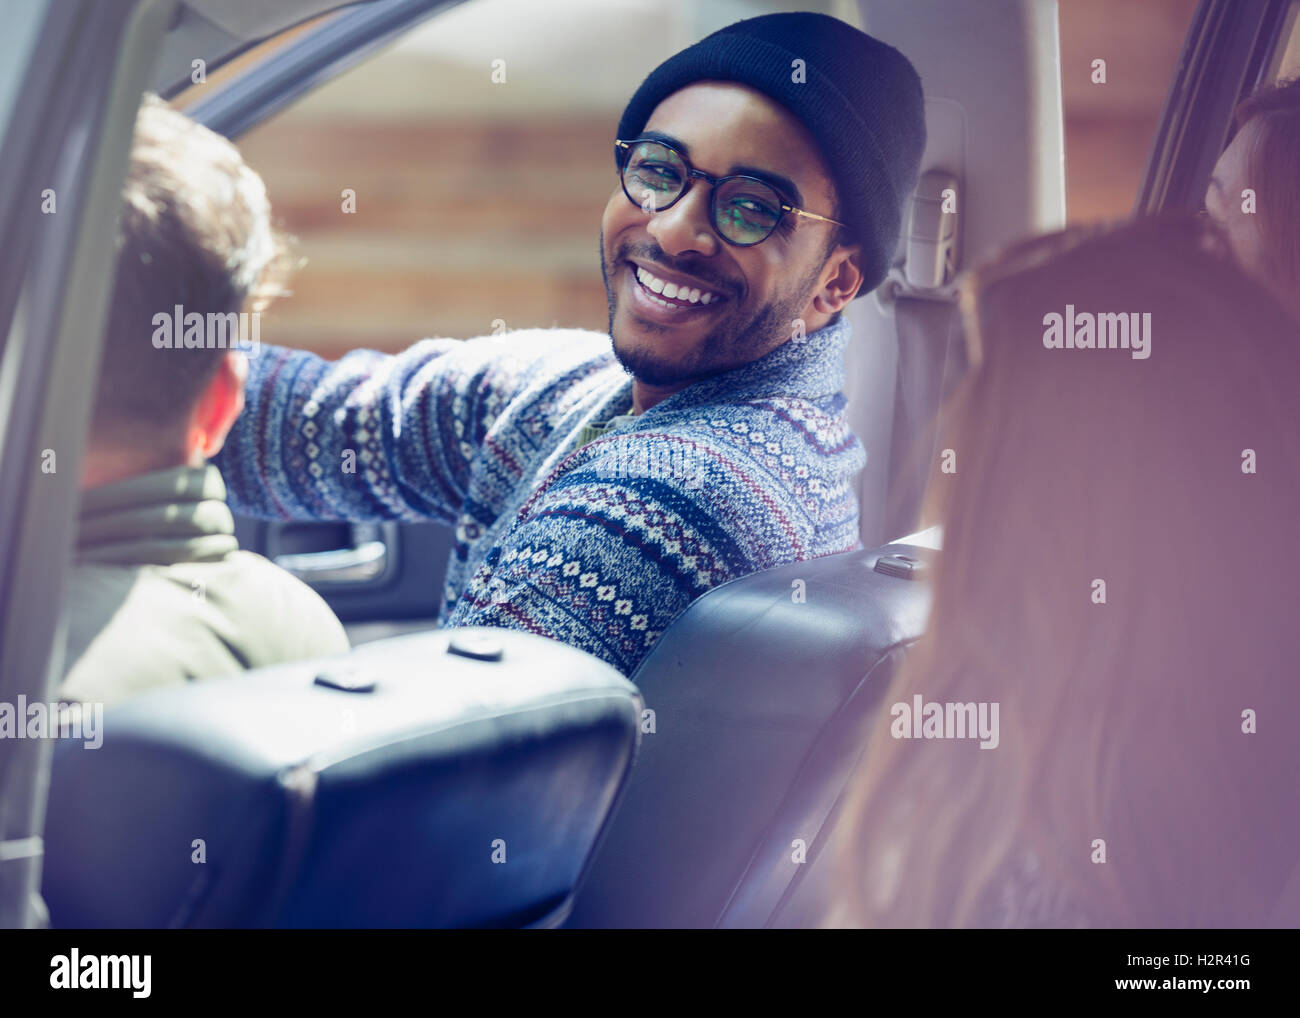 Smiling man riding in car with friends Stock Photo